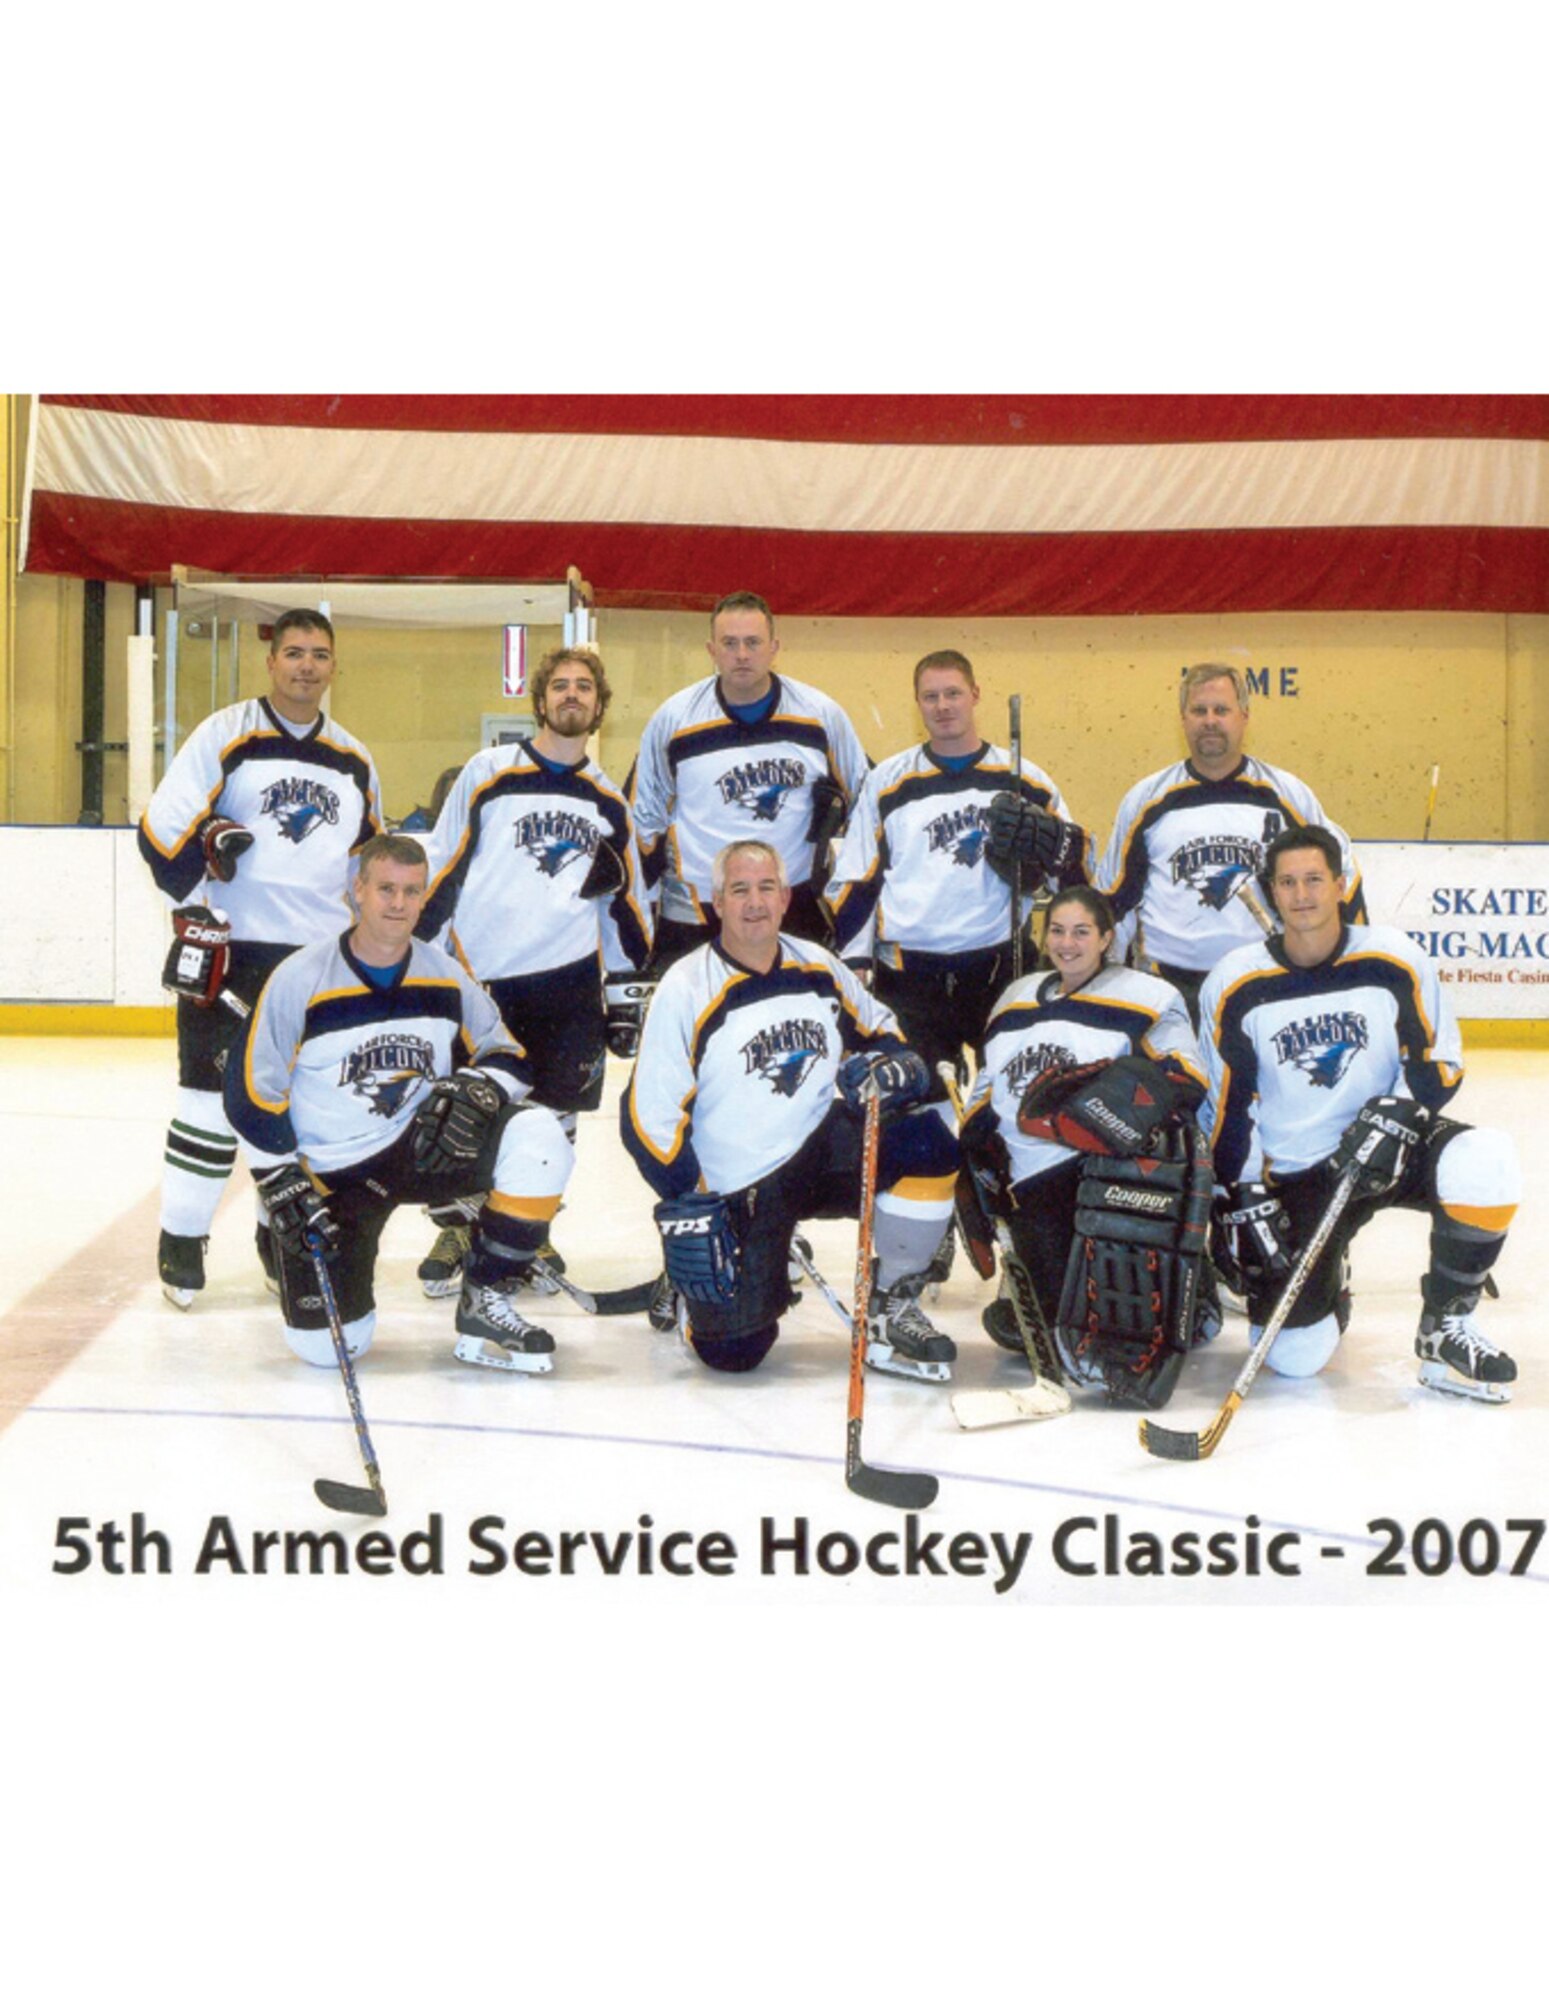 Luke AFB’s hockey team, the Thunderbolts, with Sergeant Brangaitis, pictured top left. (Courtesy photo)